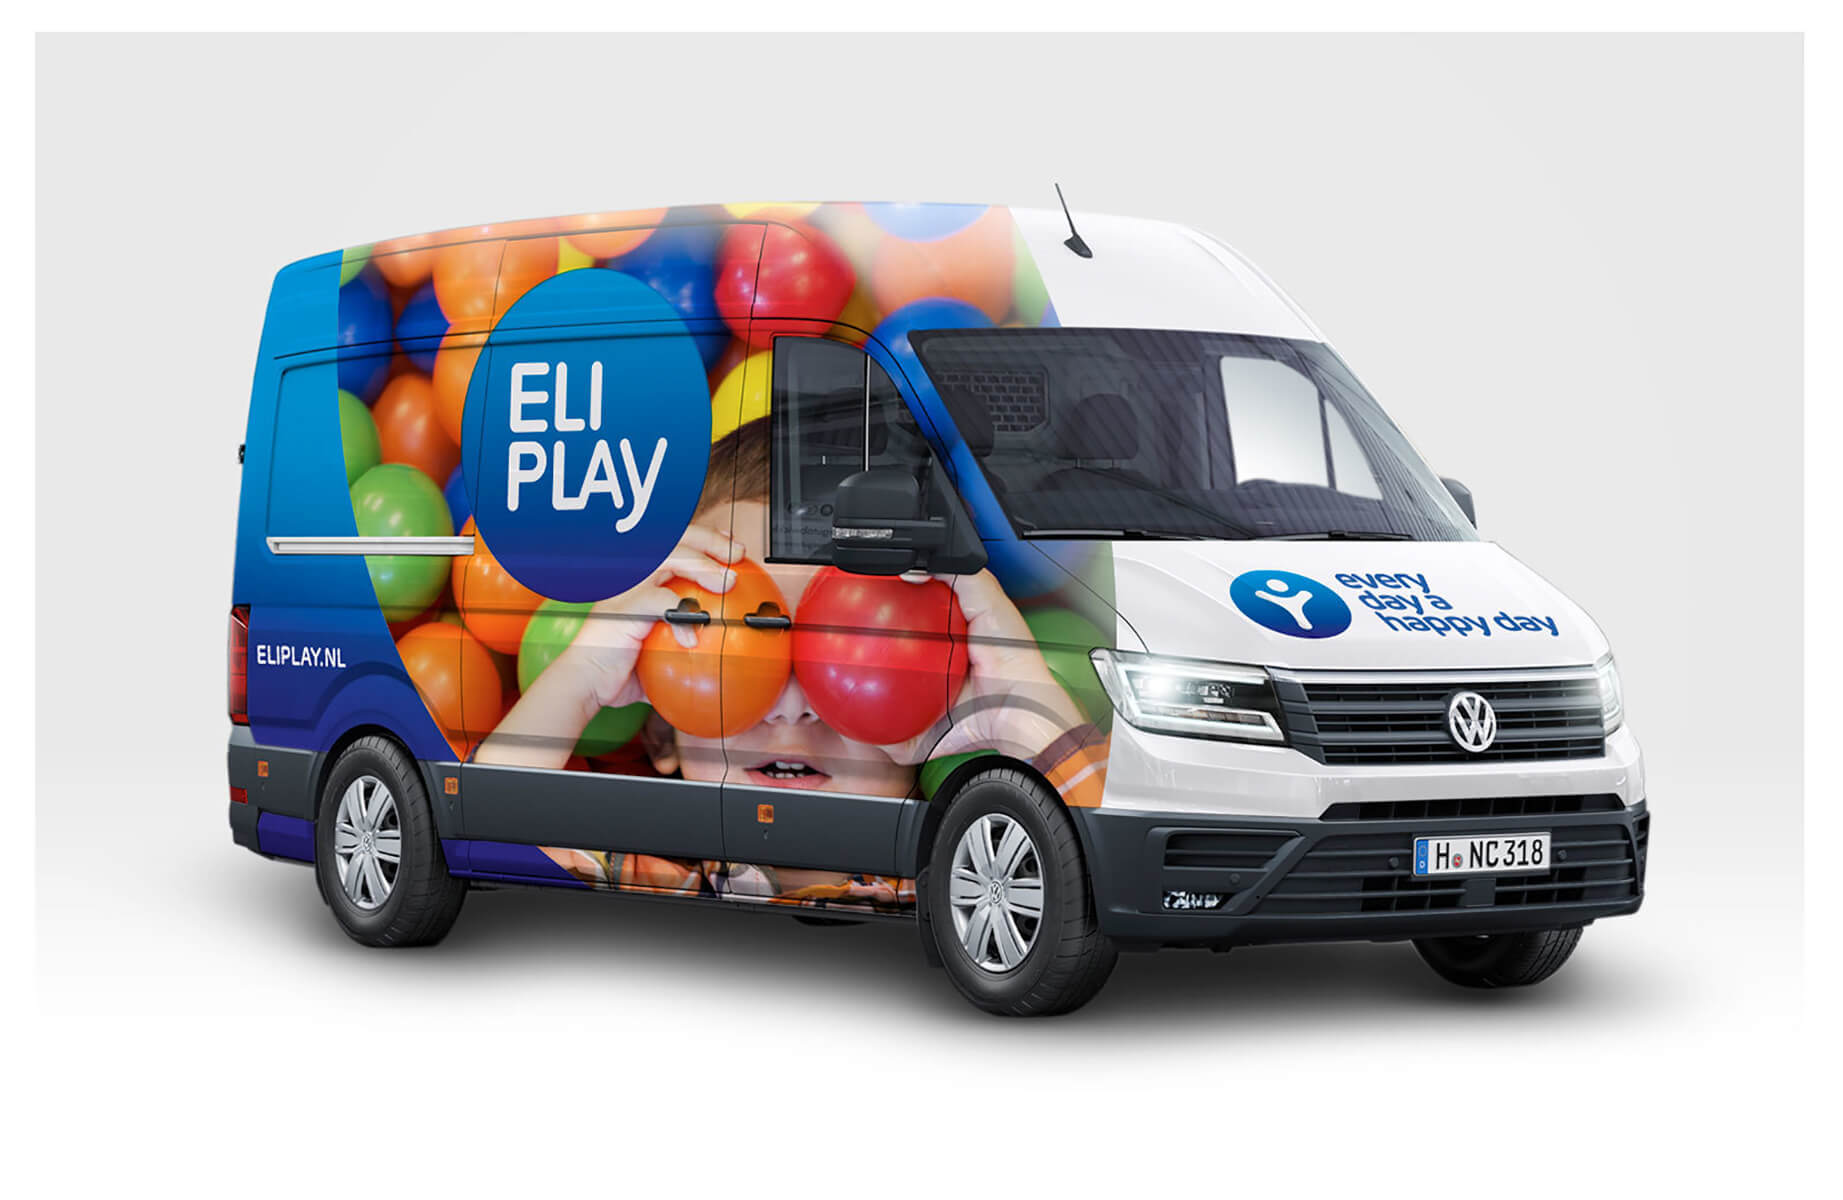 ELI Play Service, maintenance and repair activities for indoor playgrounds and trampoline parks